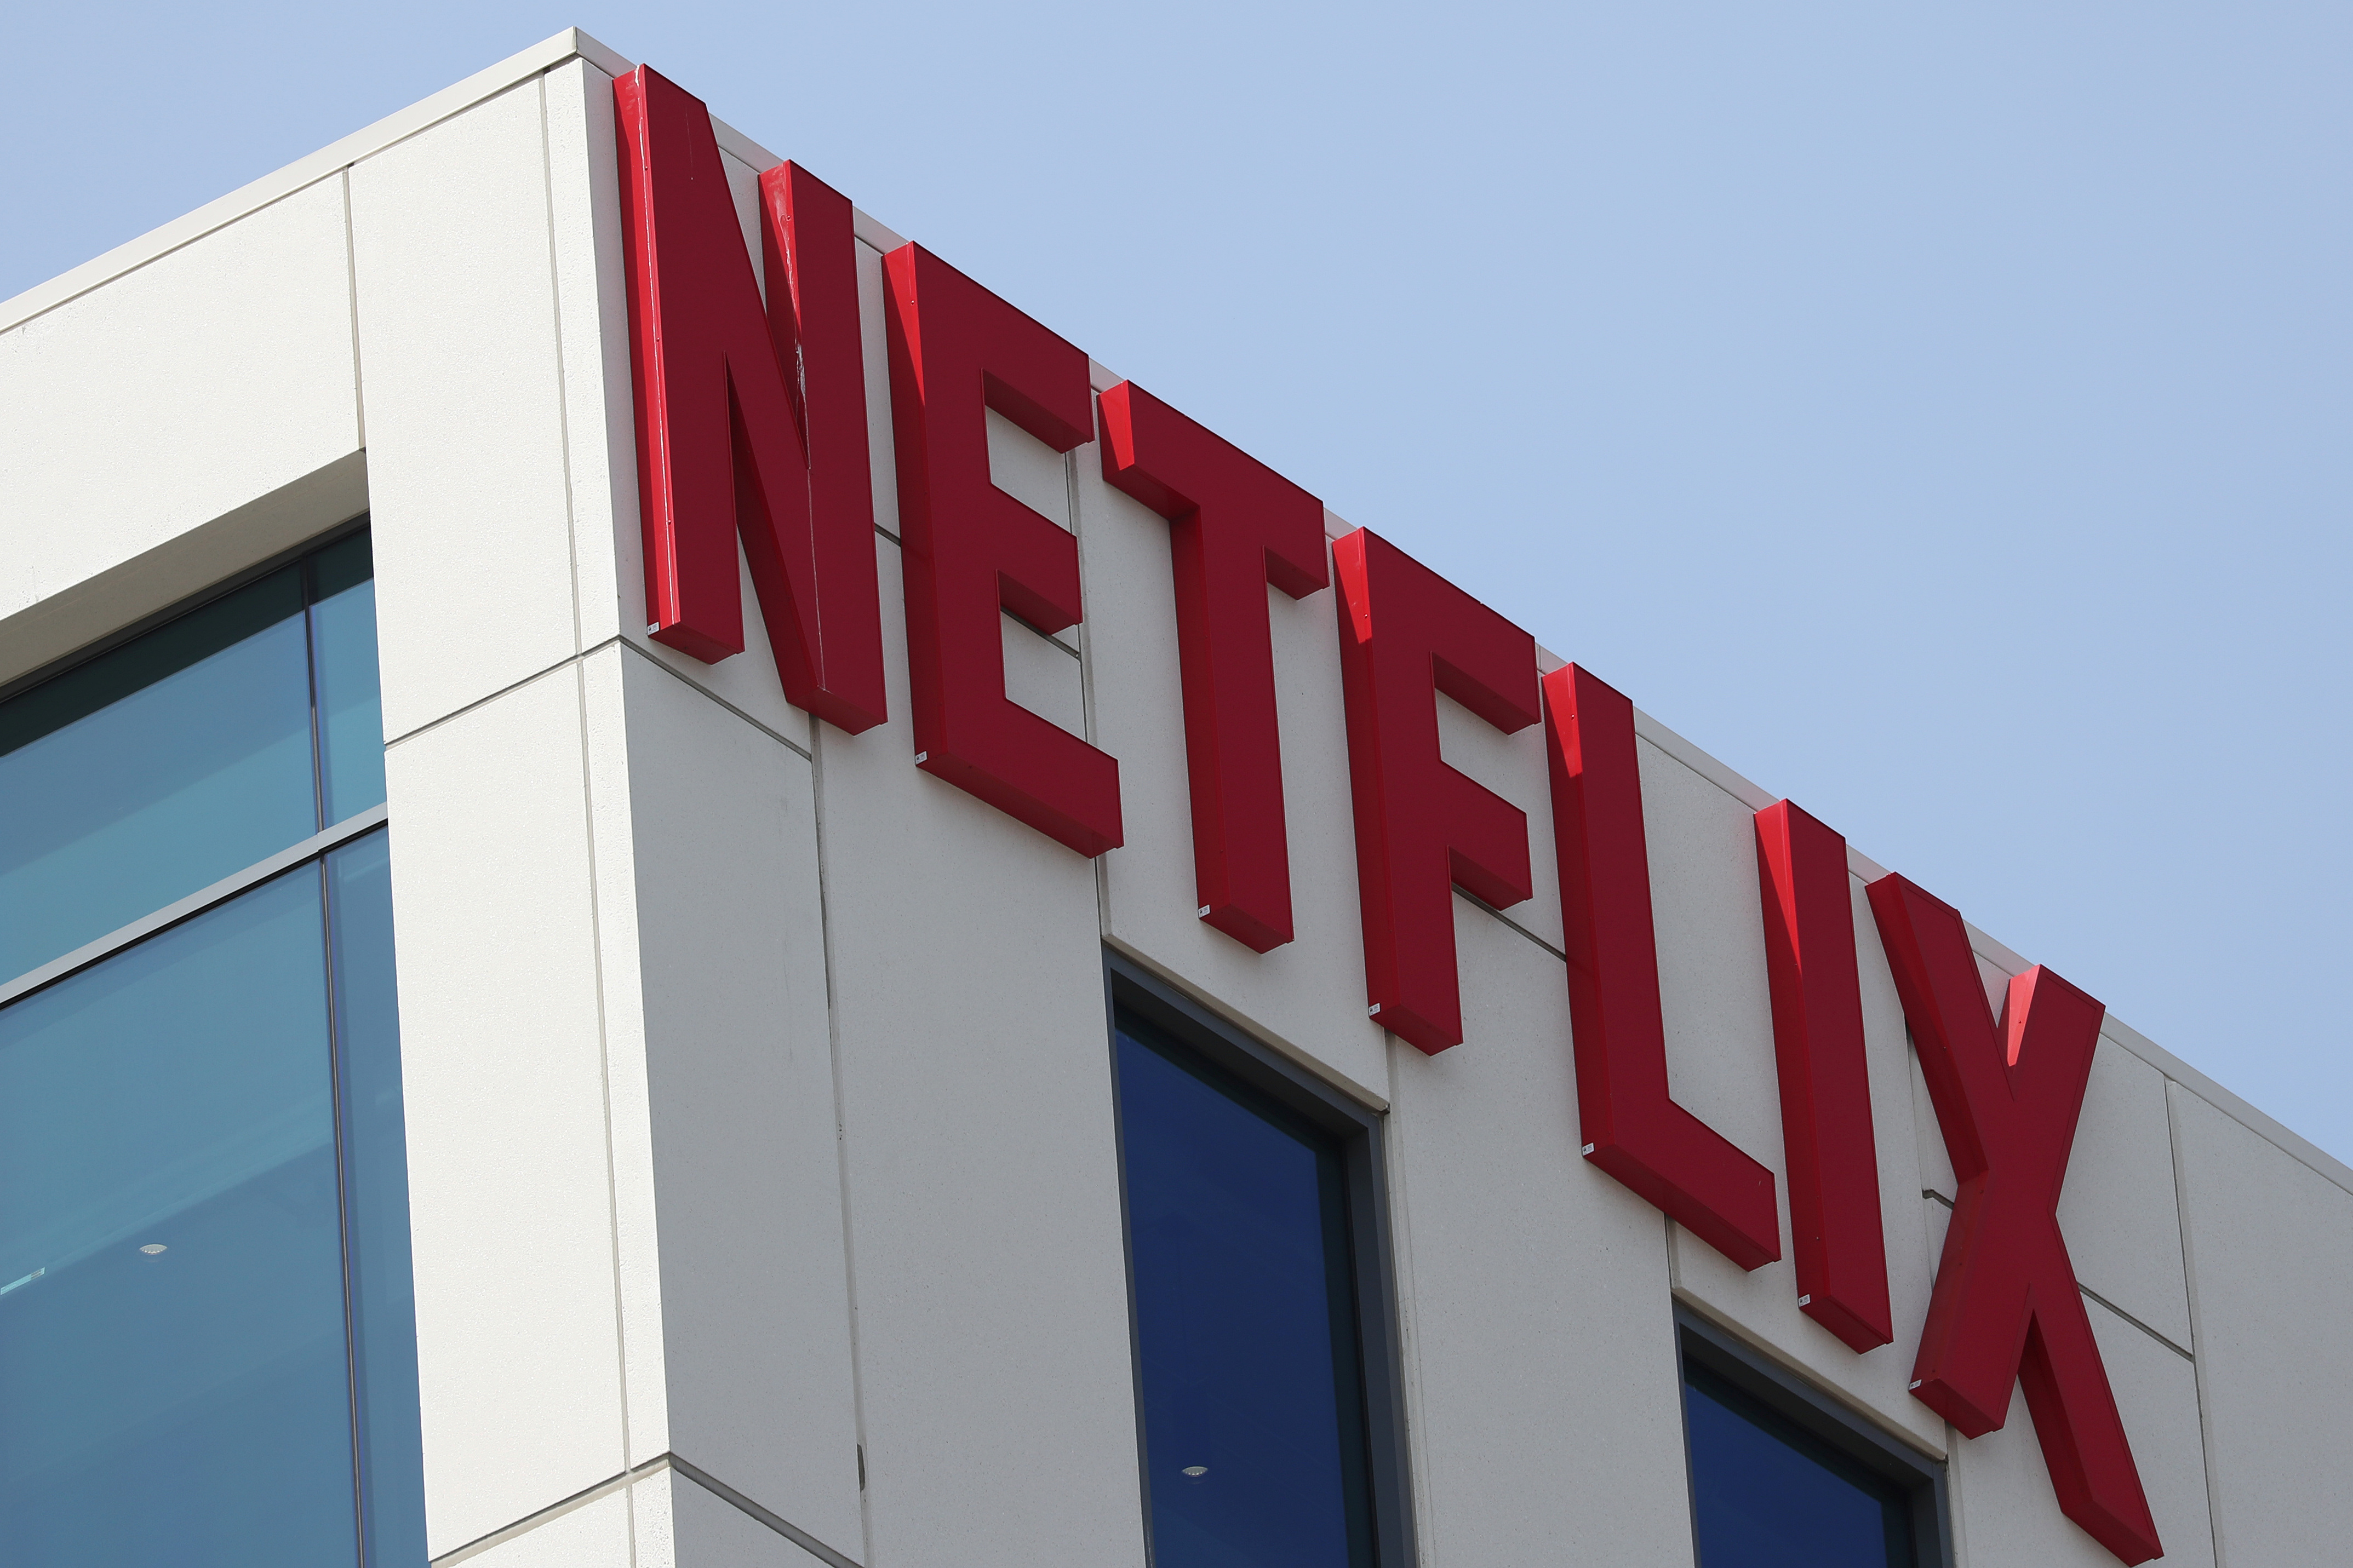 Netflix explores investing in live sports, bids for streaming rights- WSJ Reuters